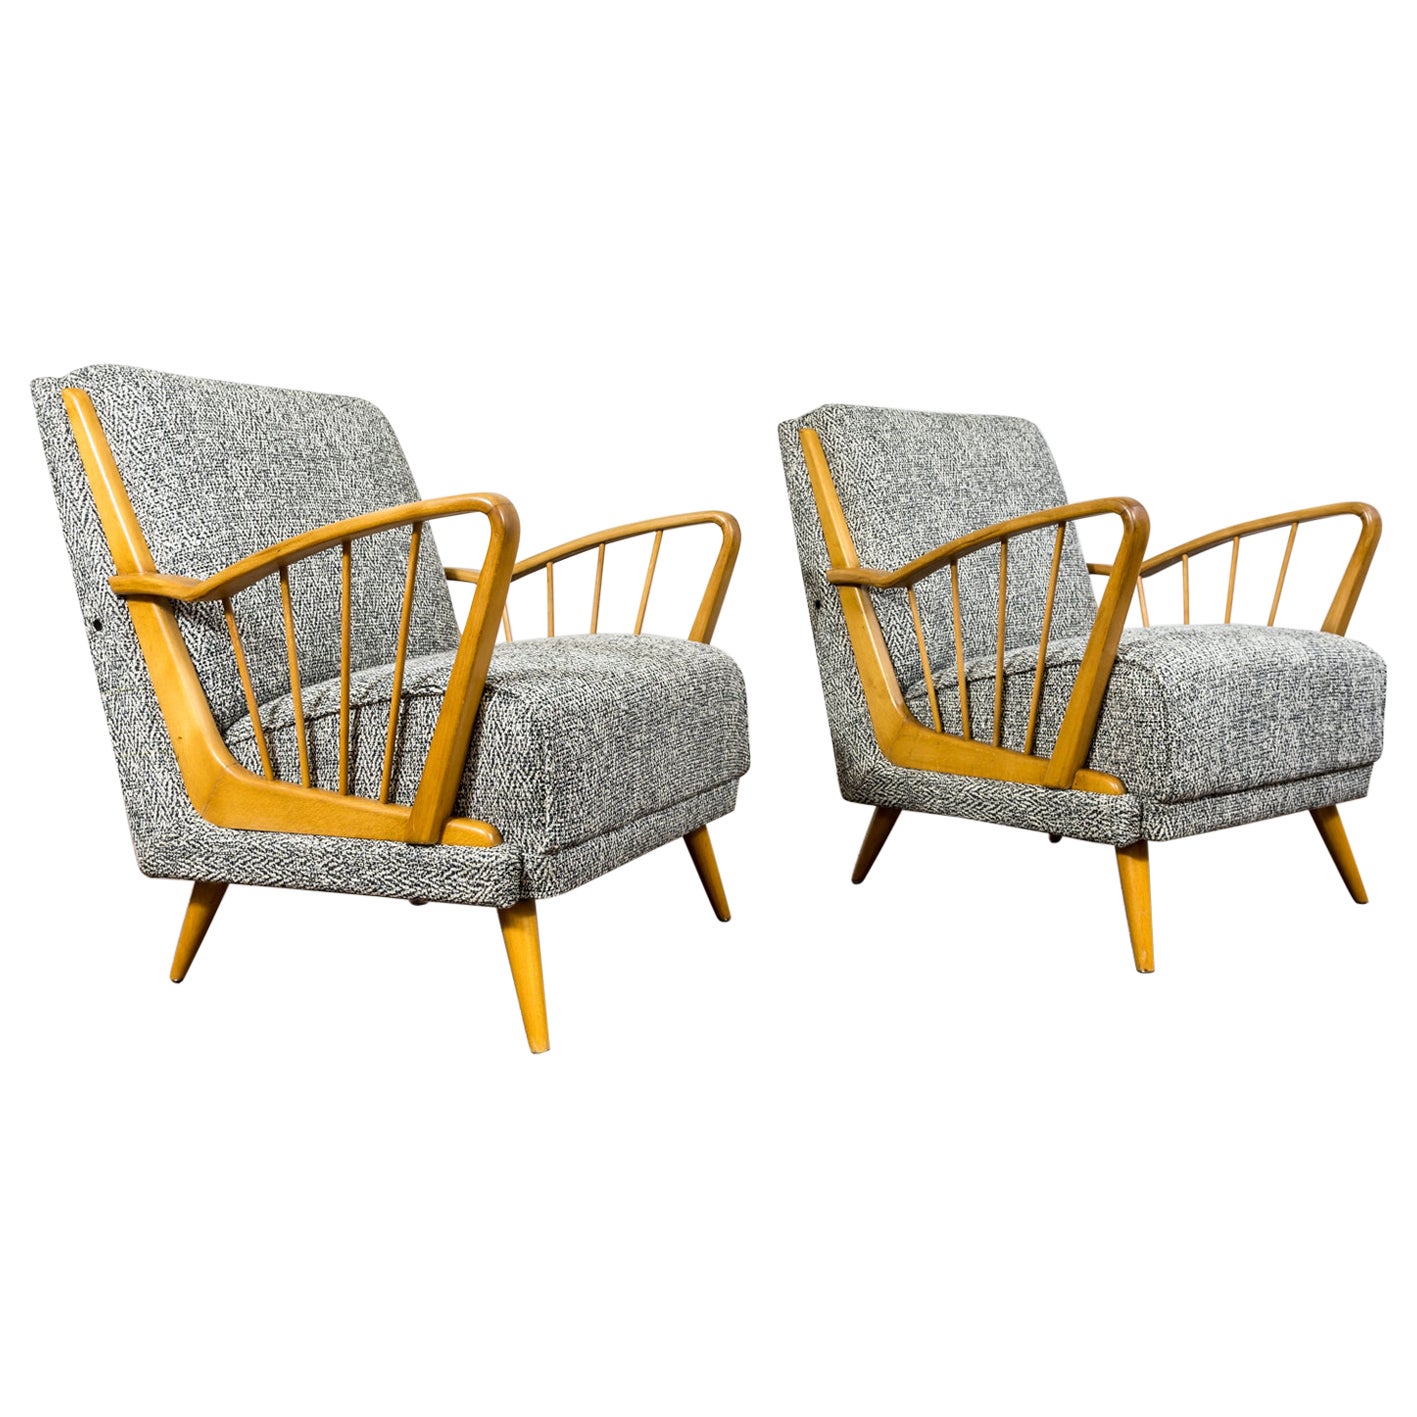 Pair Of Mid-Century Armchairs, 1950's, Germany For Sale